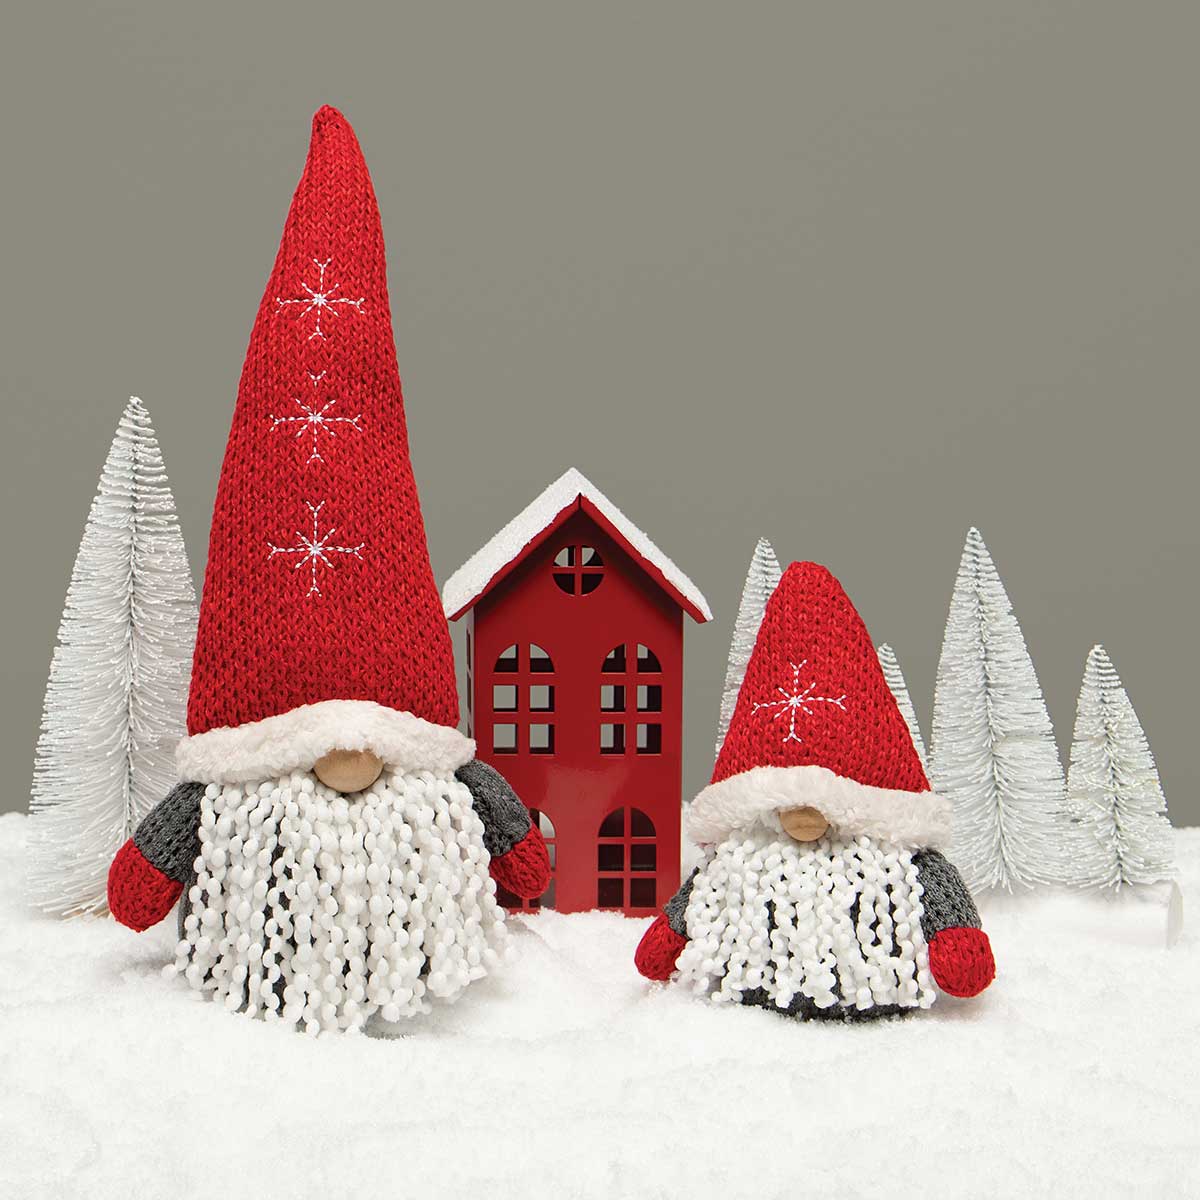 !TALL METAL HOUSE RED WITH SNOW, GLITTER AND MICA 4"X8" b50